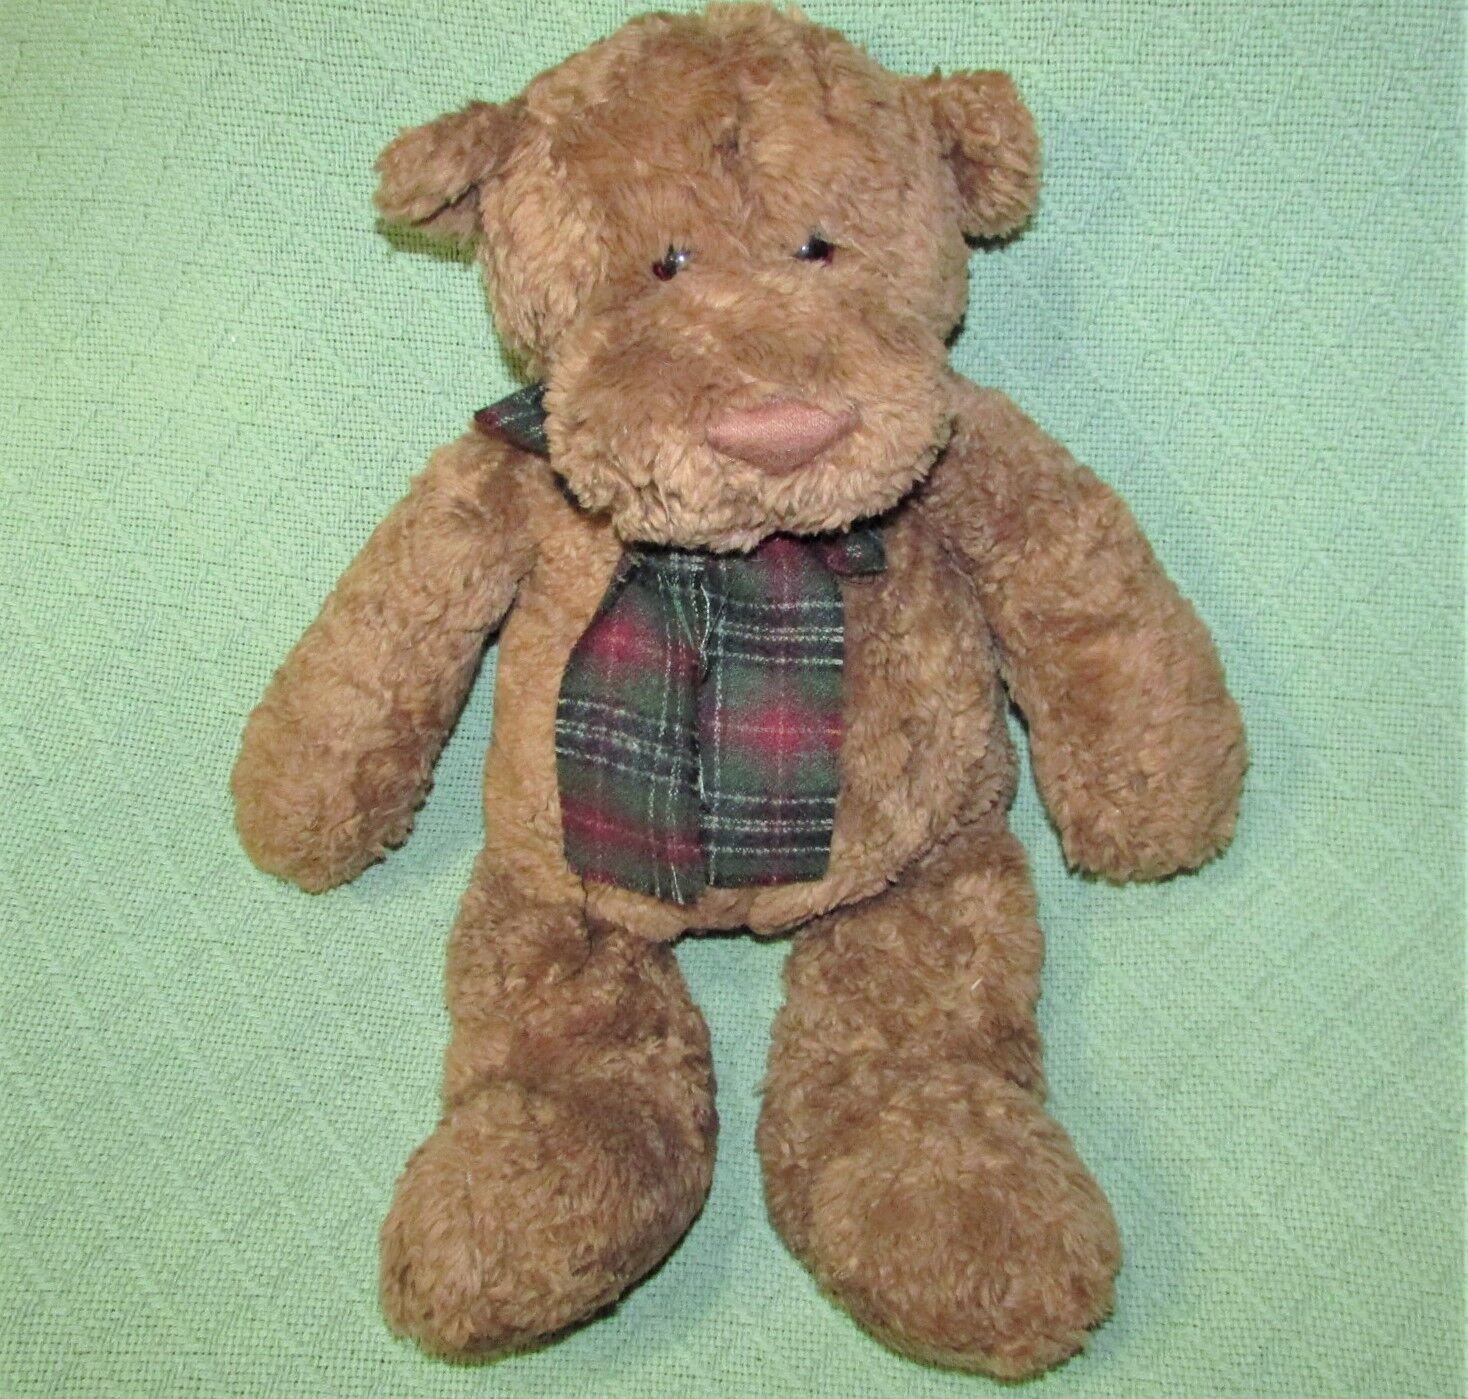 Primary image for 18" GUND TEDDY PLUSH BEAR Brown with Green Plaid SCARF Stuffed 42592 Animal Toy